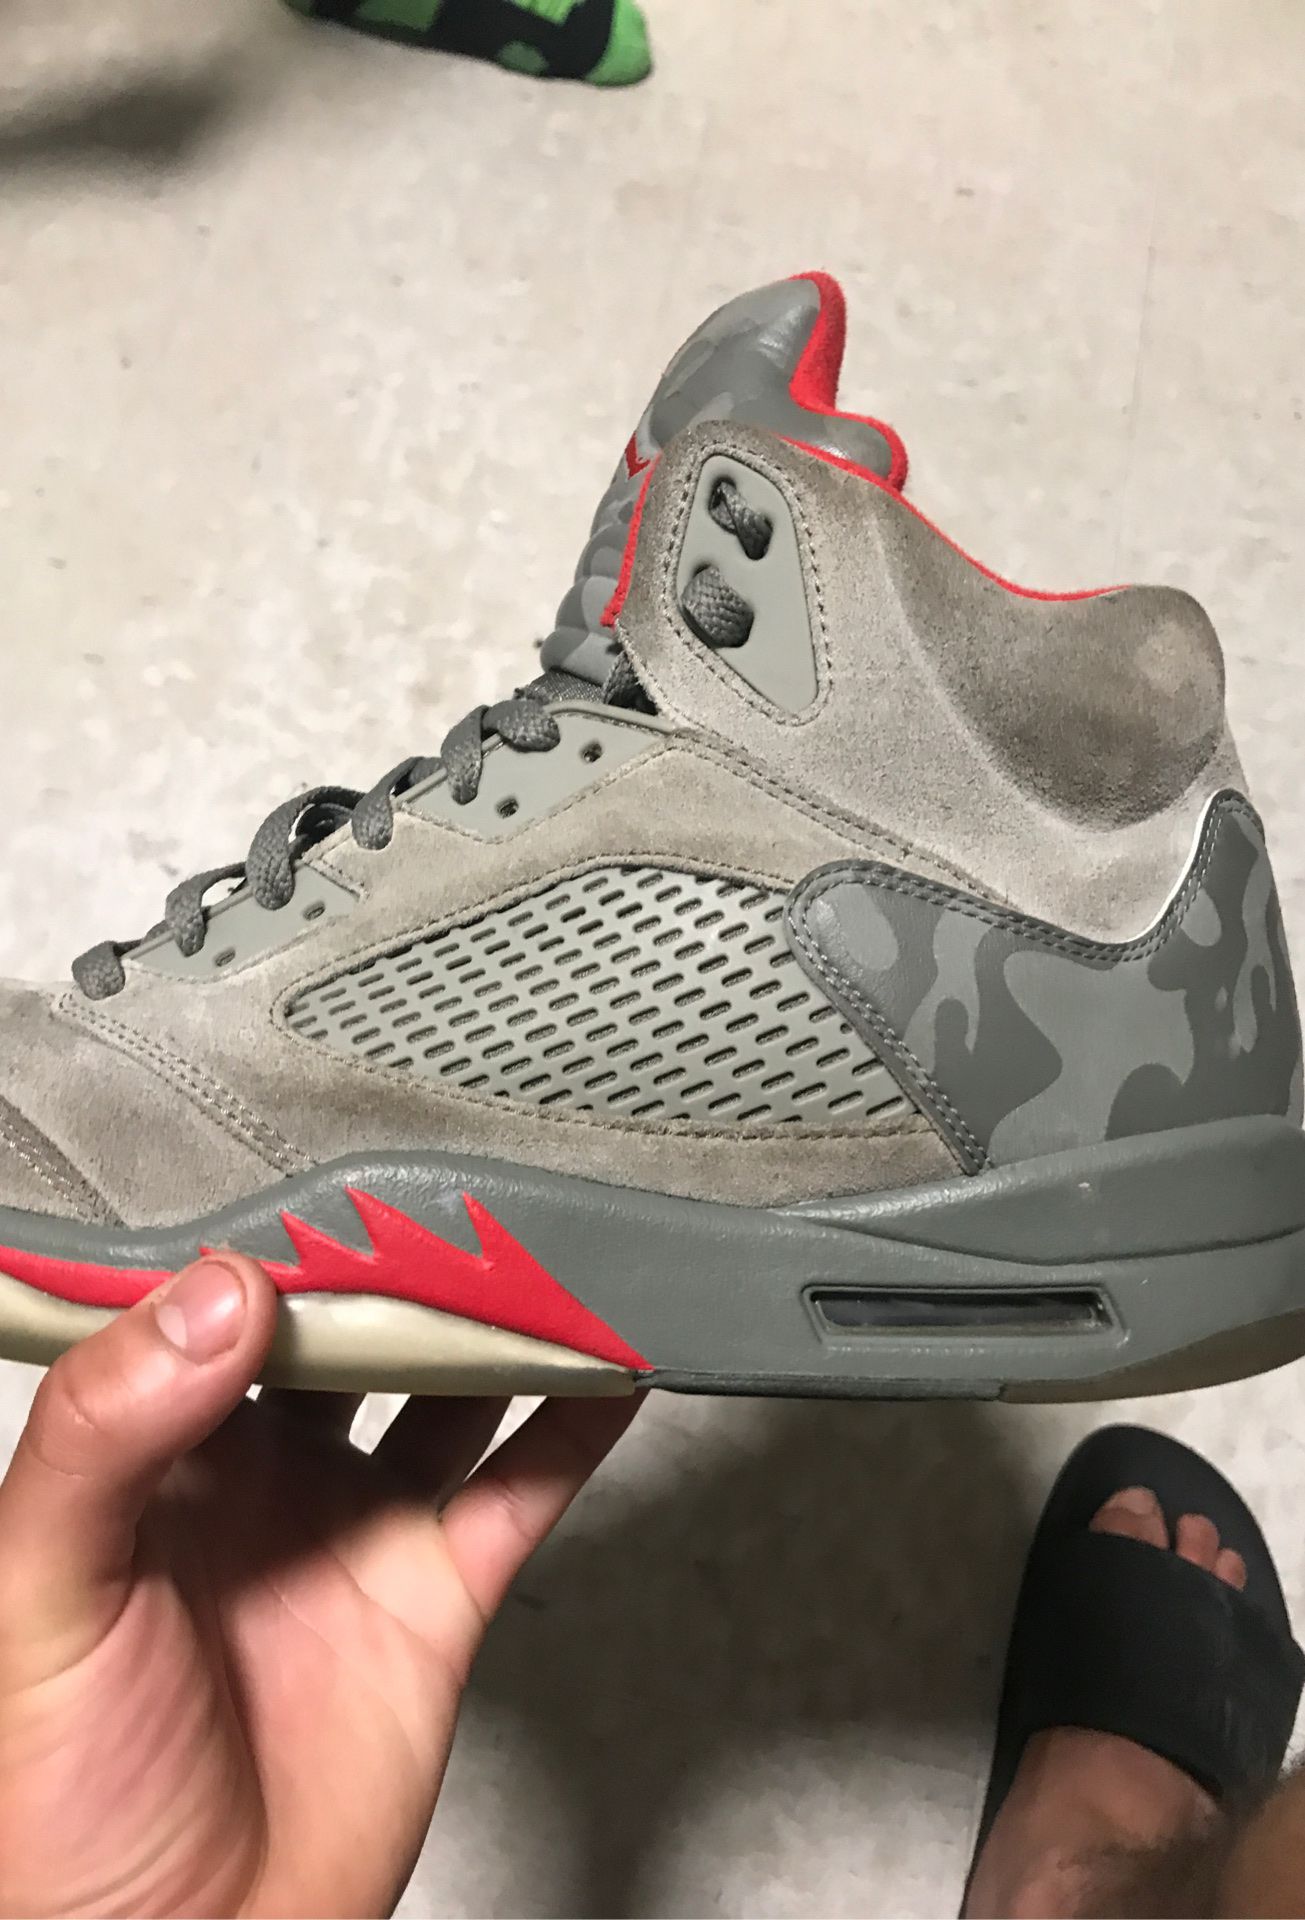 Military 5s size 11